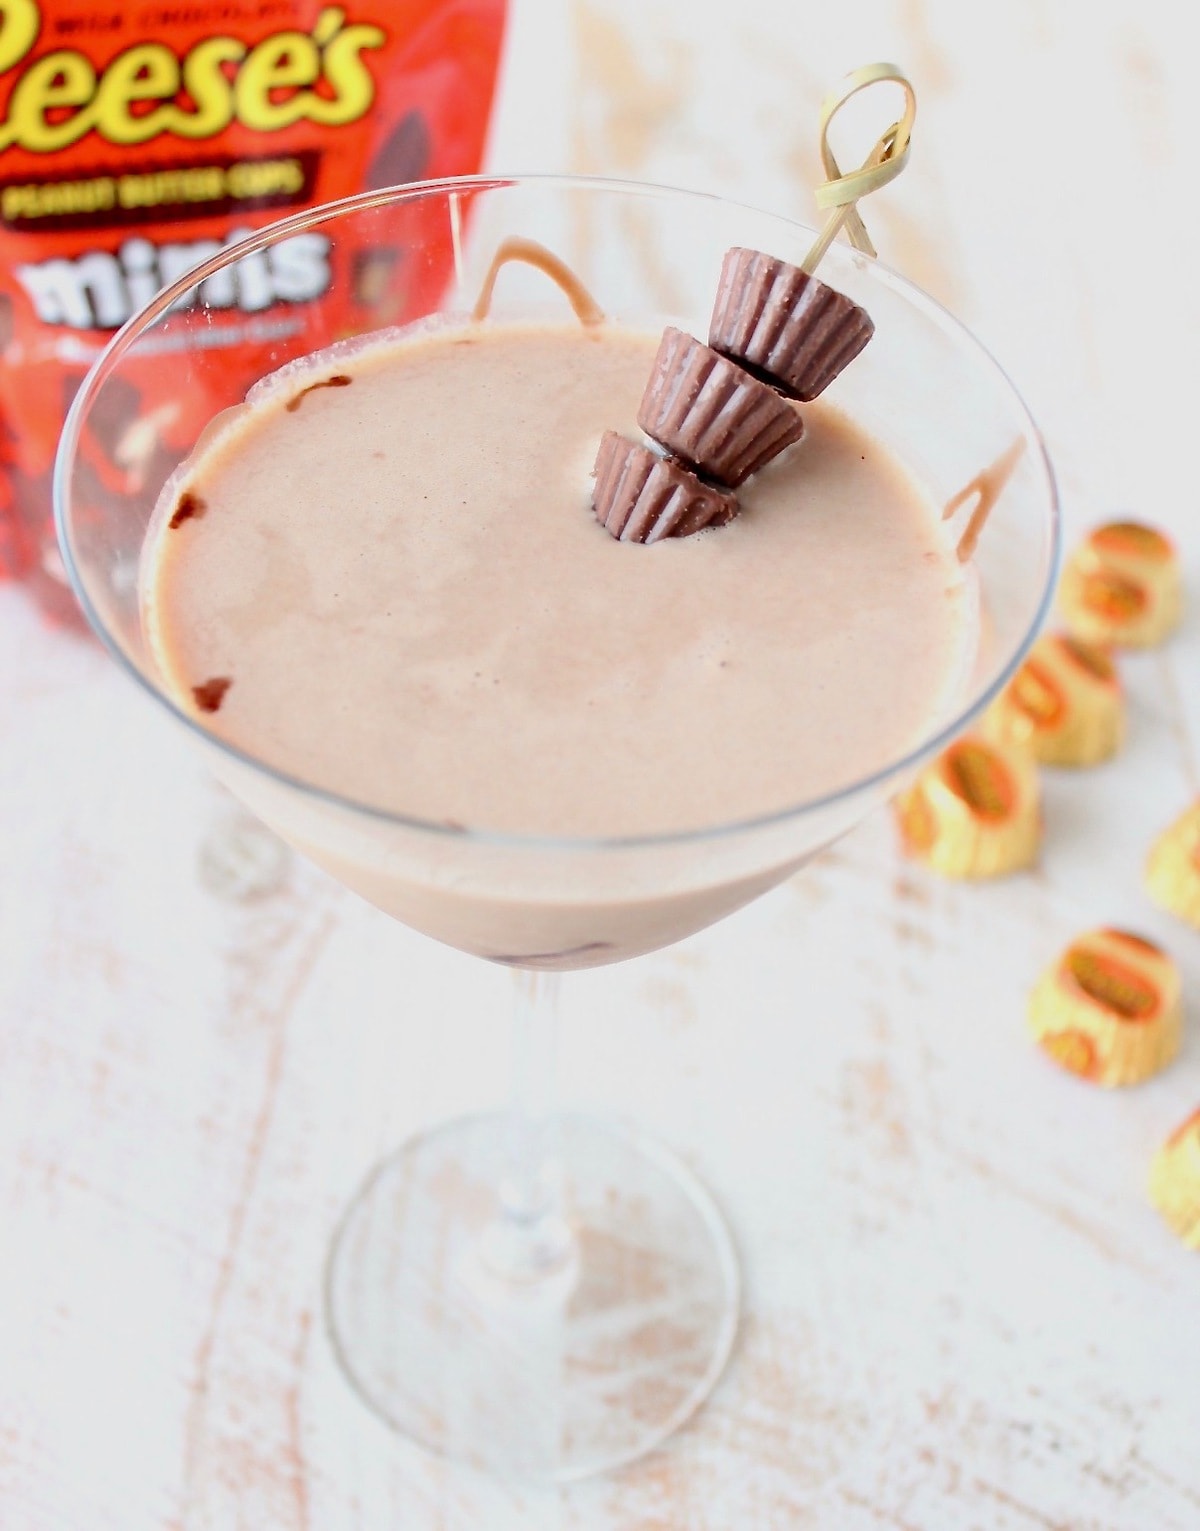 Reese's Martini in martini glass with skewer of mini reese's peanut butter cups and orange bag of reese's peanut butter cups